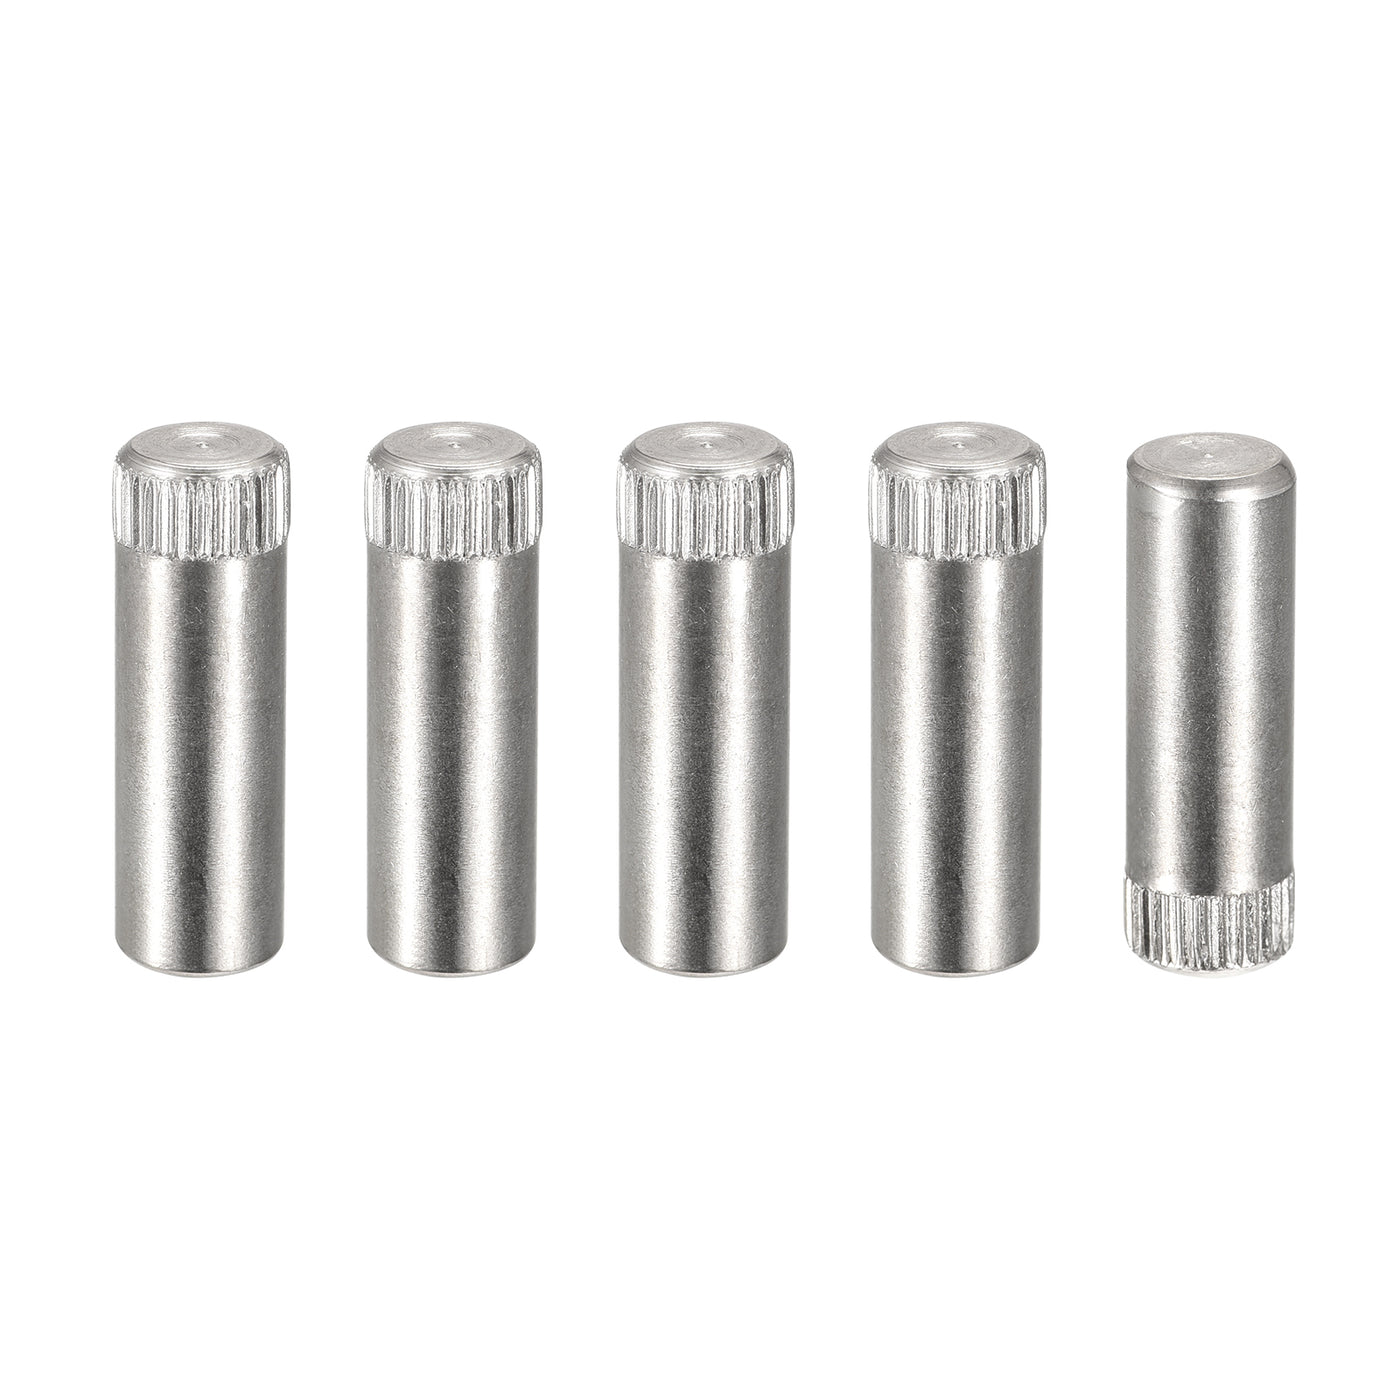 uxcell Uxcell 8x25mm 304 Stainless Steel Dowel Pins, 5Pcs Knurled Head Flat End Dowel Pin